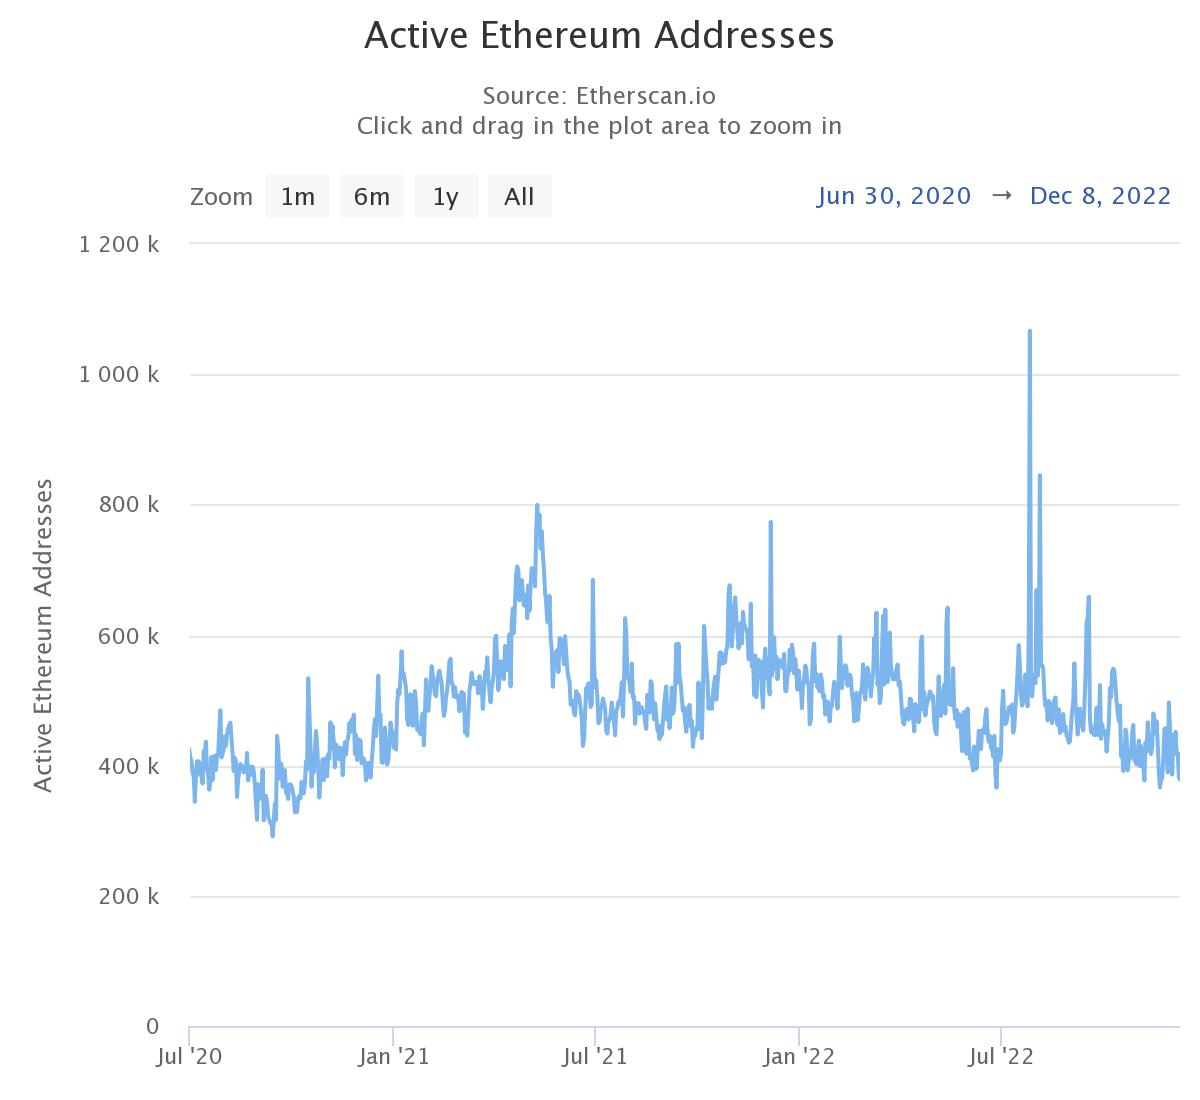 Number of daily active addresses